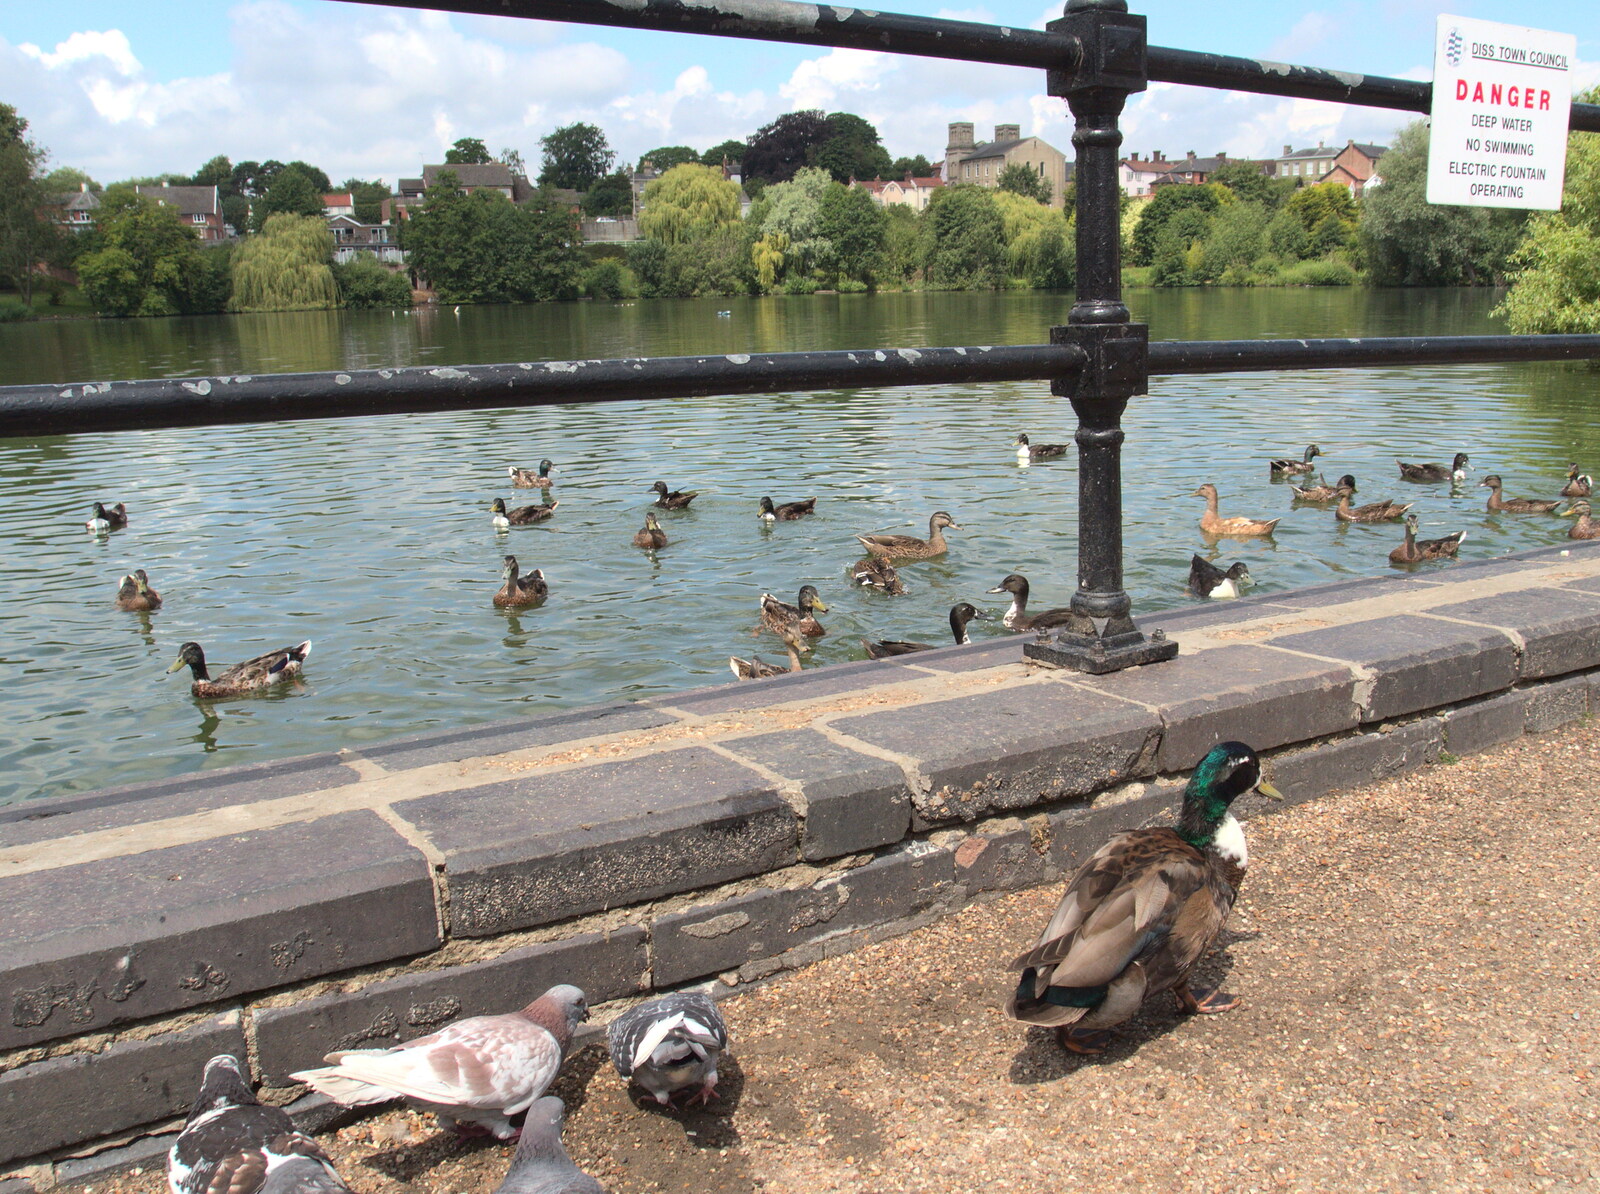 Ducks by the Mere from A Busy Day and a Church Fair, Diss, Norfolk - 28th June 2014